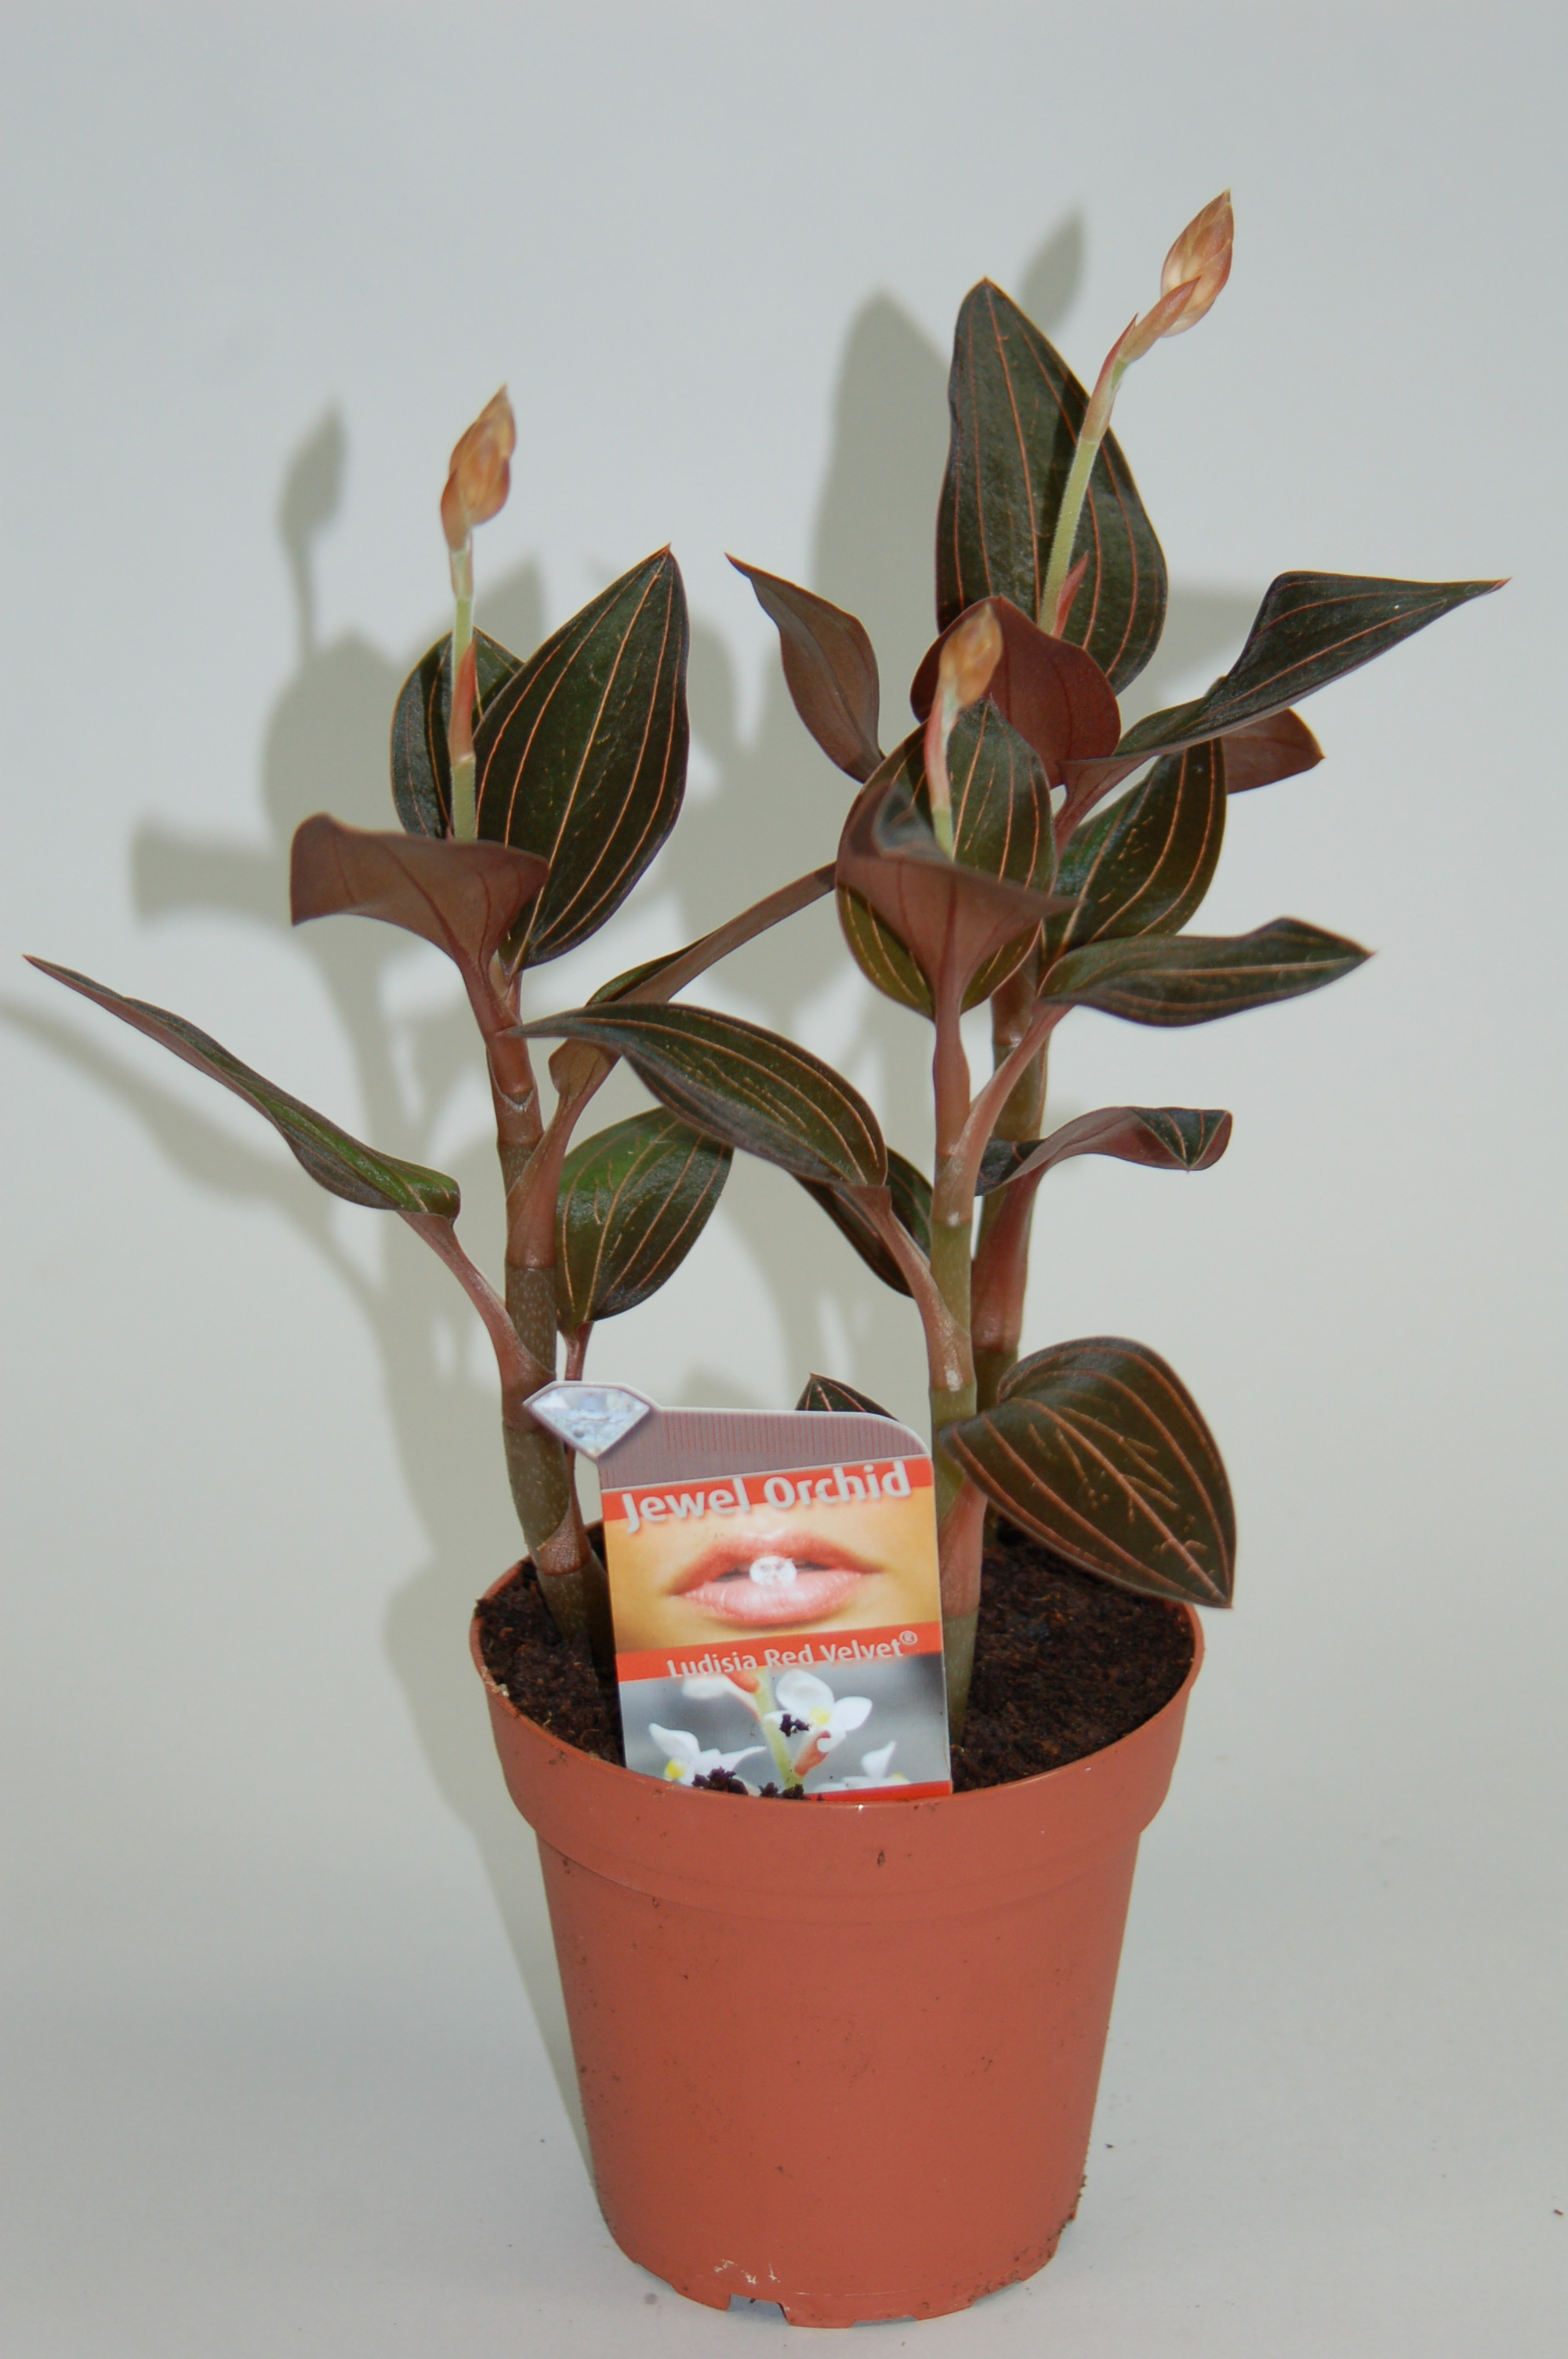 Ludisia discolor | Orchideen-Wichmann.de - Highest horticultural quality  and experience since 1897